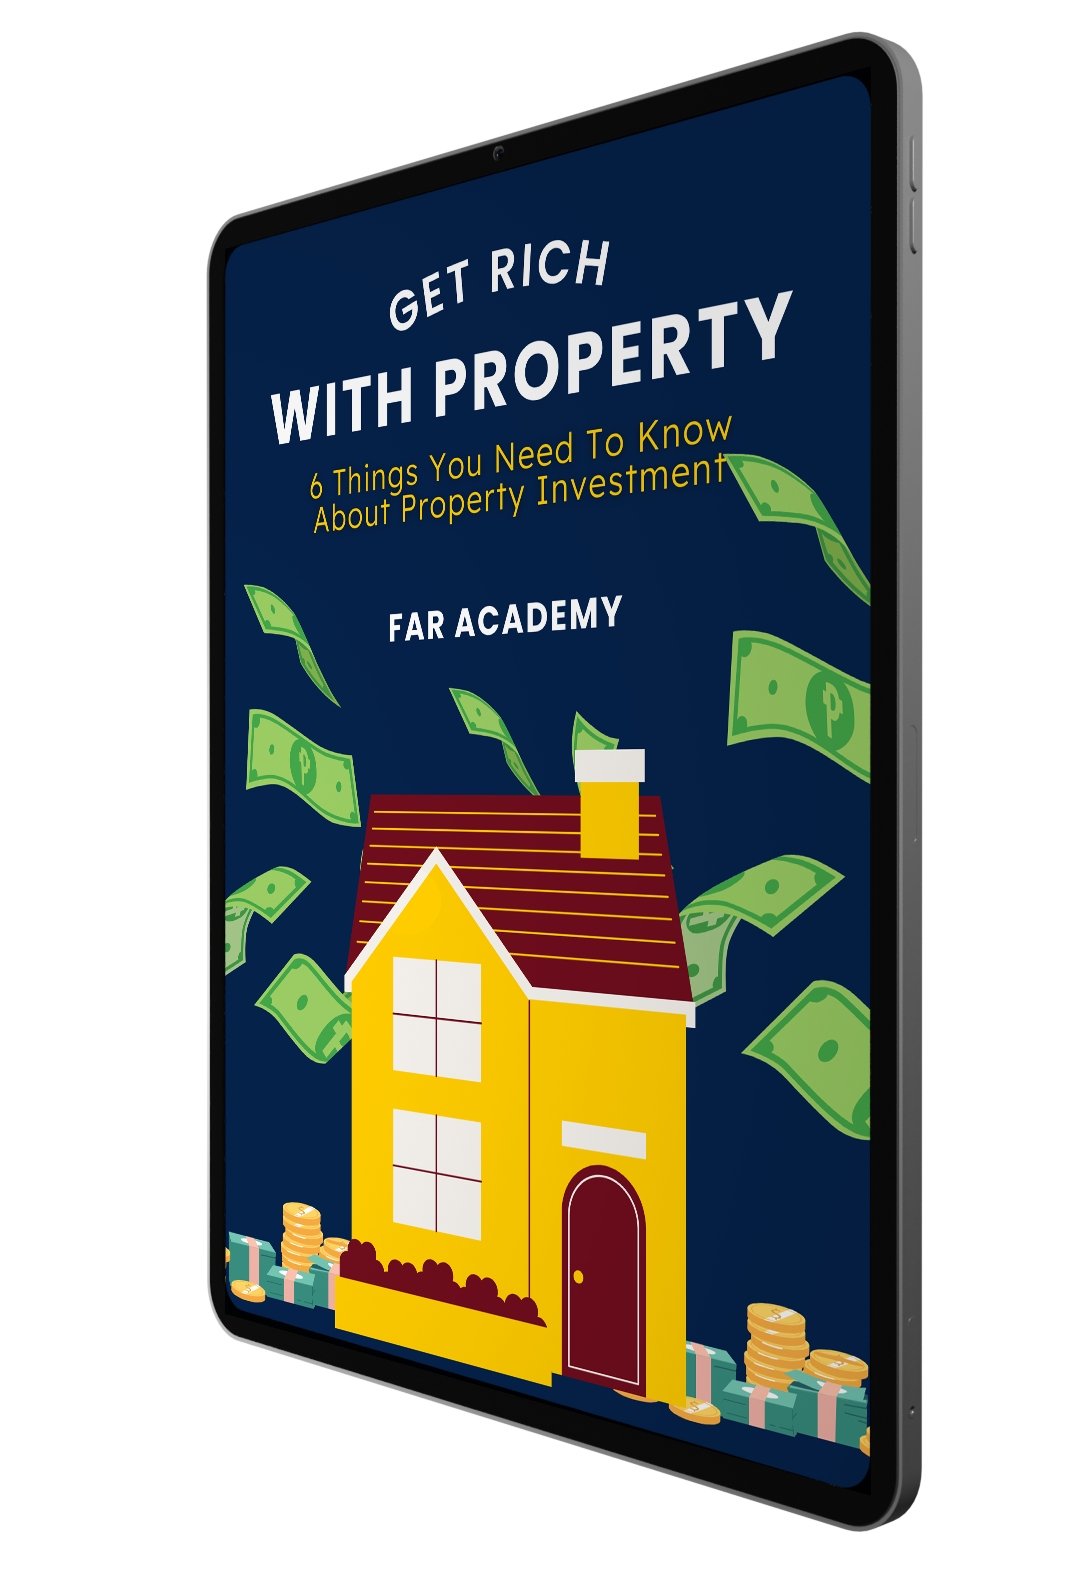 Get Rich With Property: 6 Things You Need To Know About Property Investment